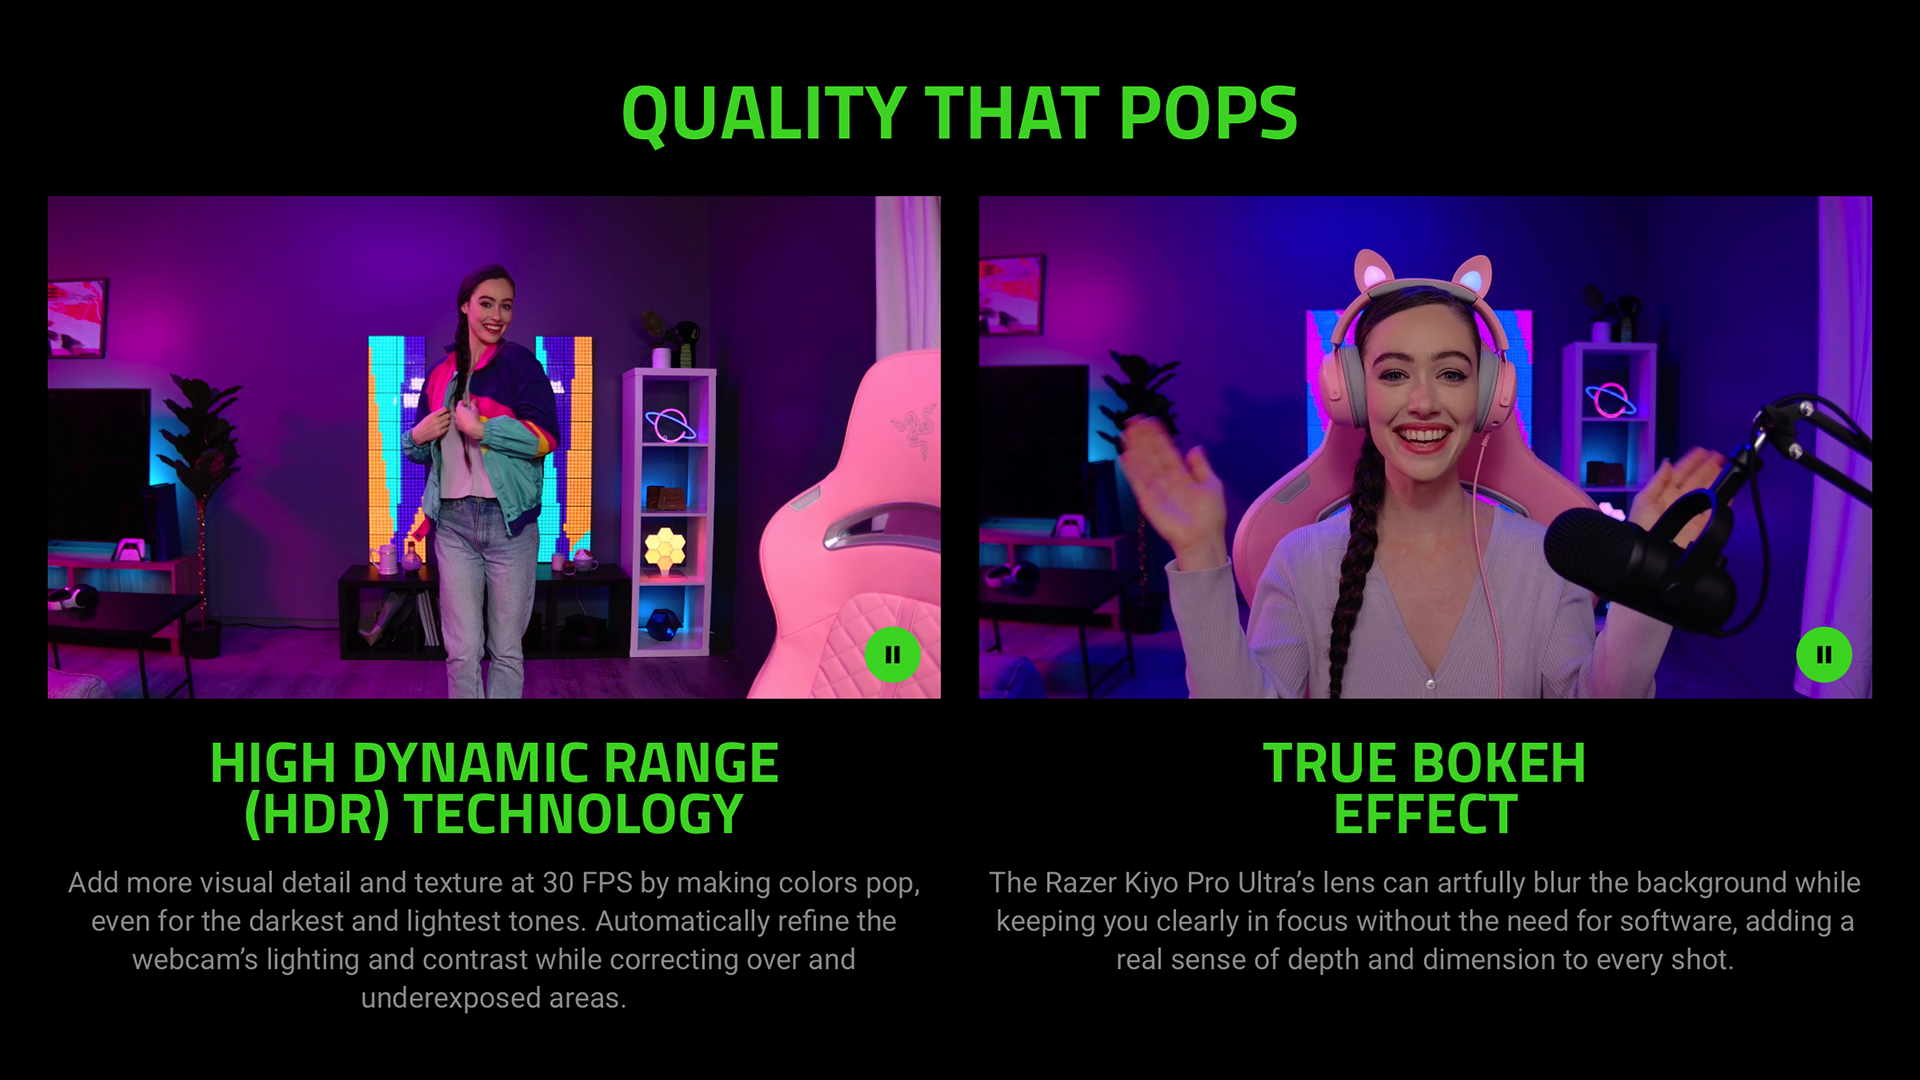 Examples of the Razer Kiyo Pro Ultra's HDR and bokeh effects.